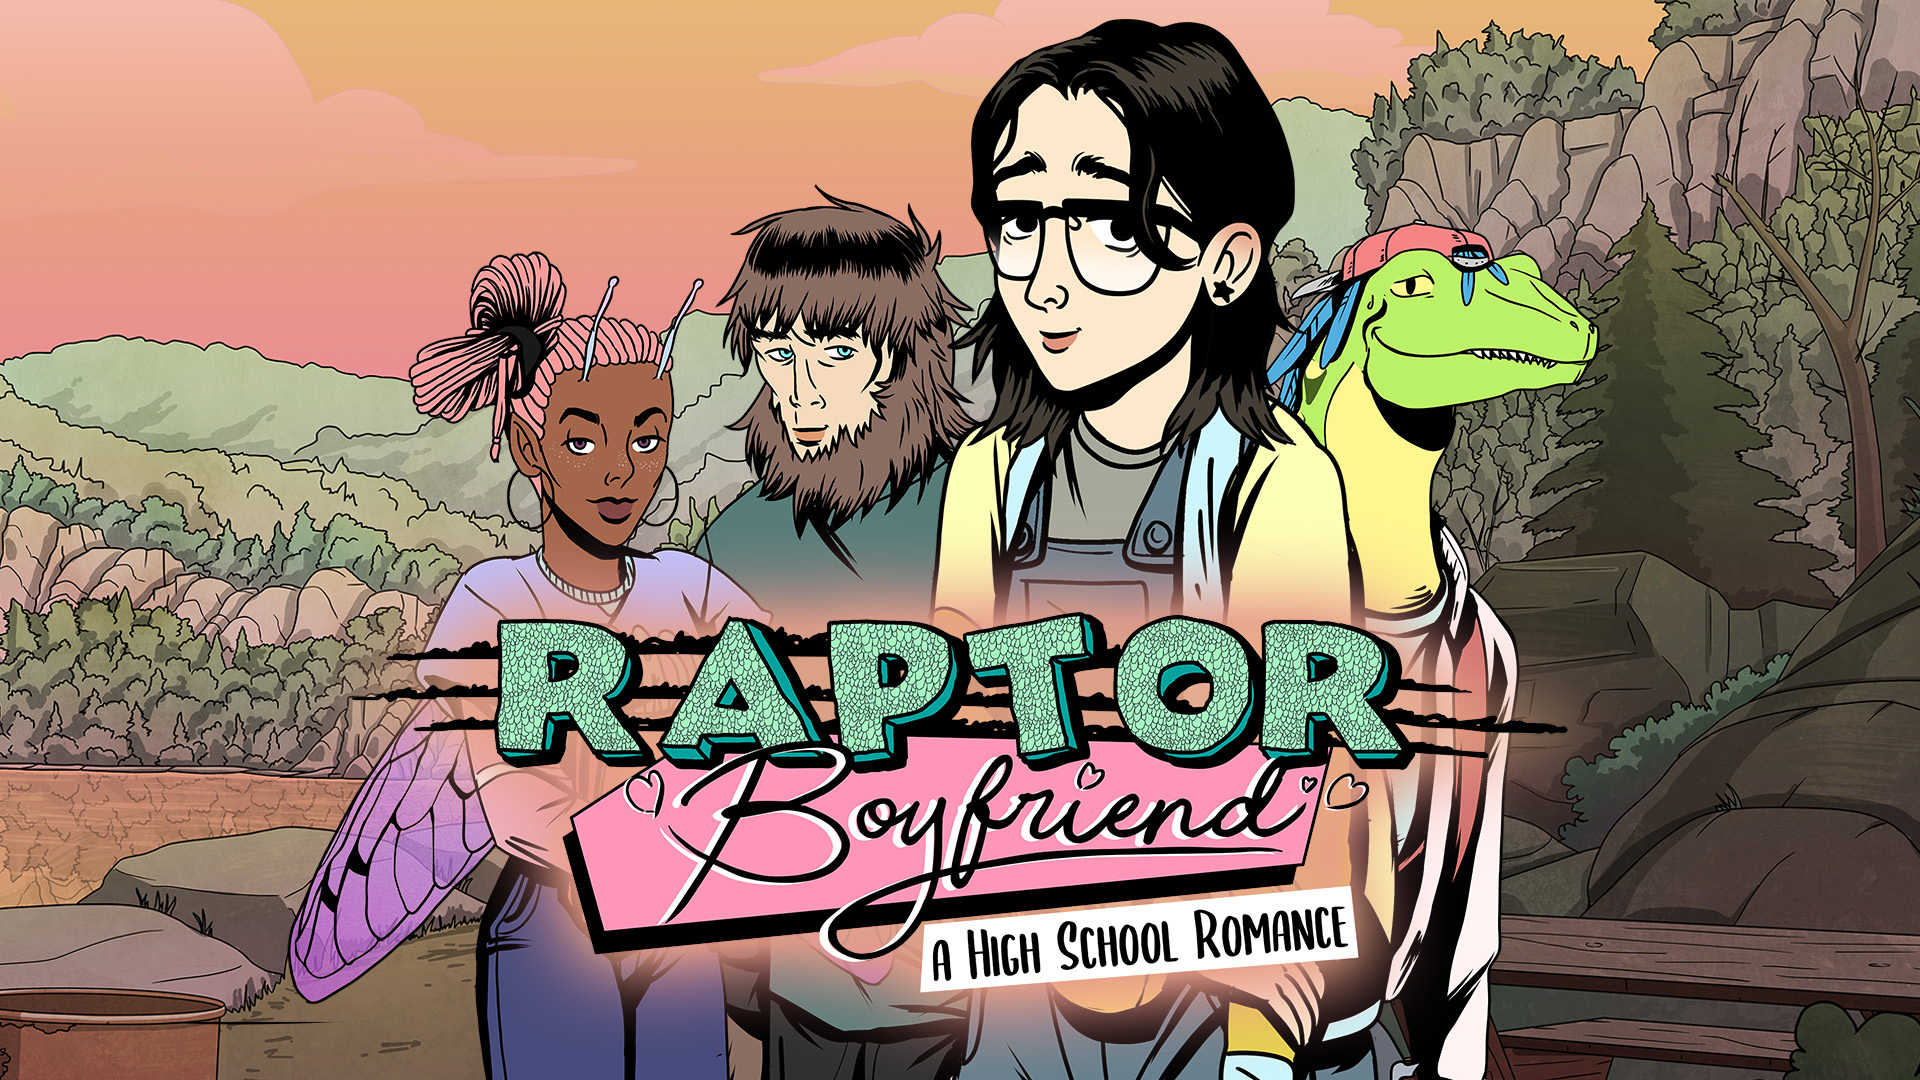 A girl, Stella, stands with three friends in this key art for Raptor Boyfriend: A High School Romance. The friends are a fairy, a sasquatch, and a dinosaur.